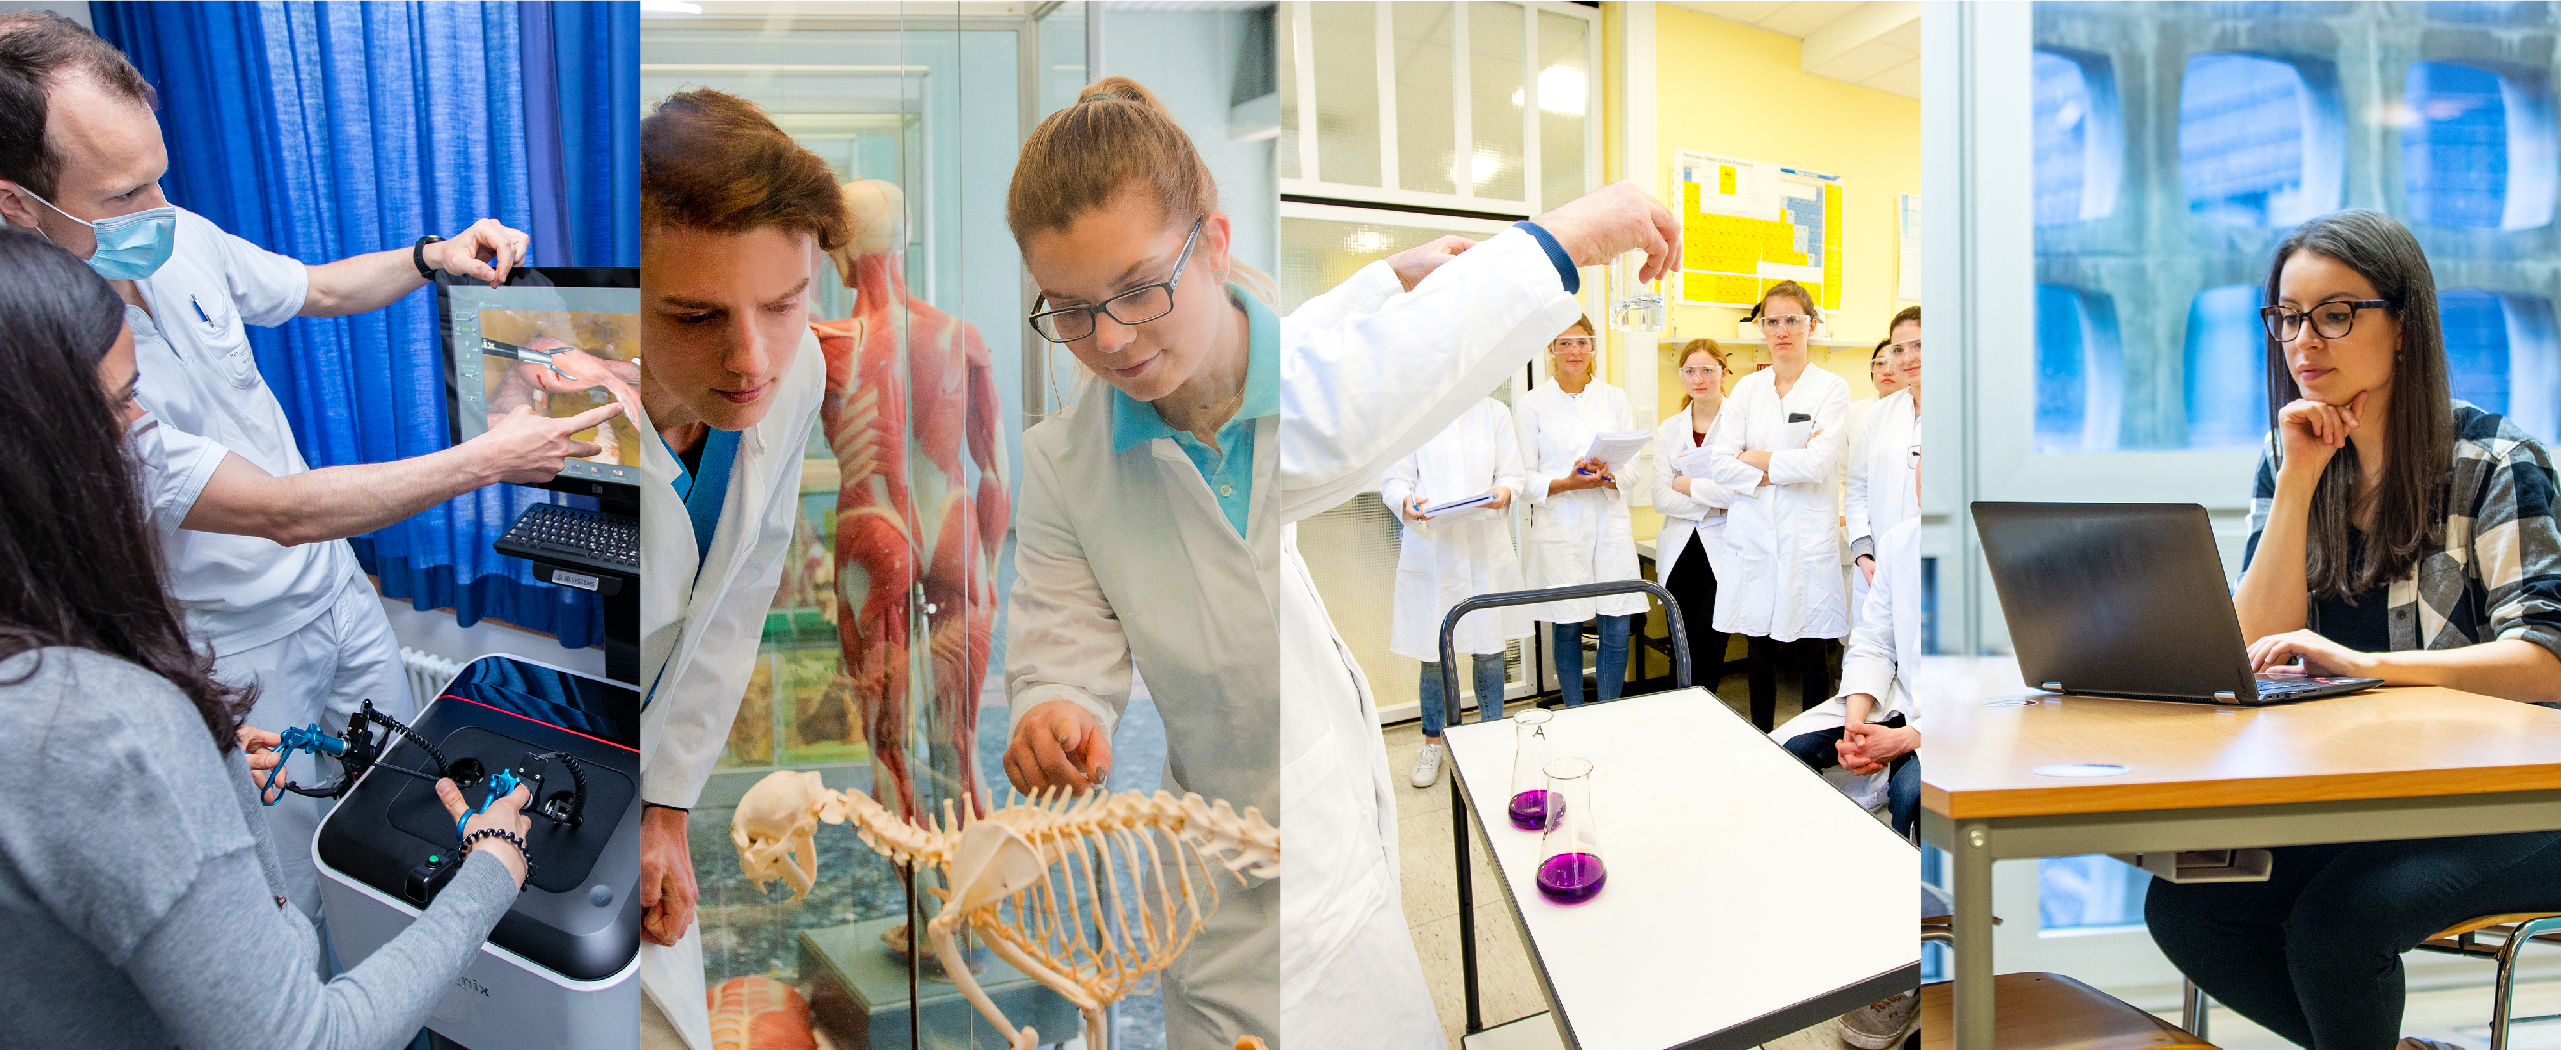 Collage of photos on the theme of study: students at the operating room simulator, students looking at an animal skeleton, students in white coats being taught, students at table with laptop computer